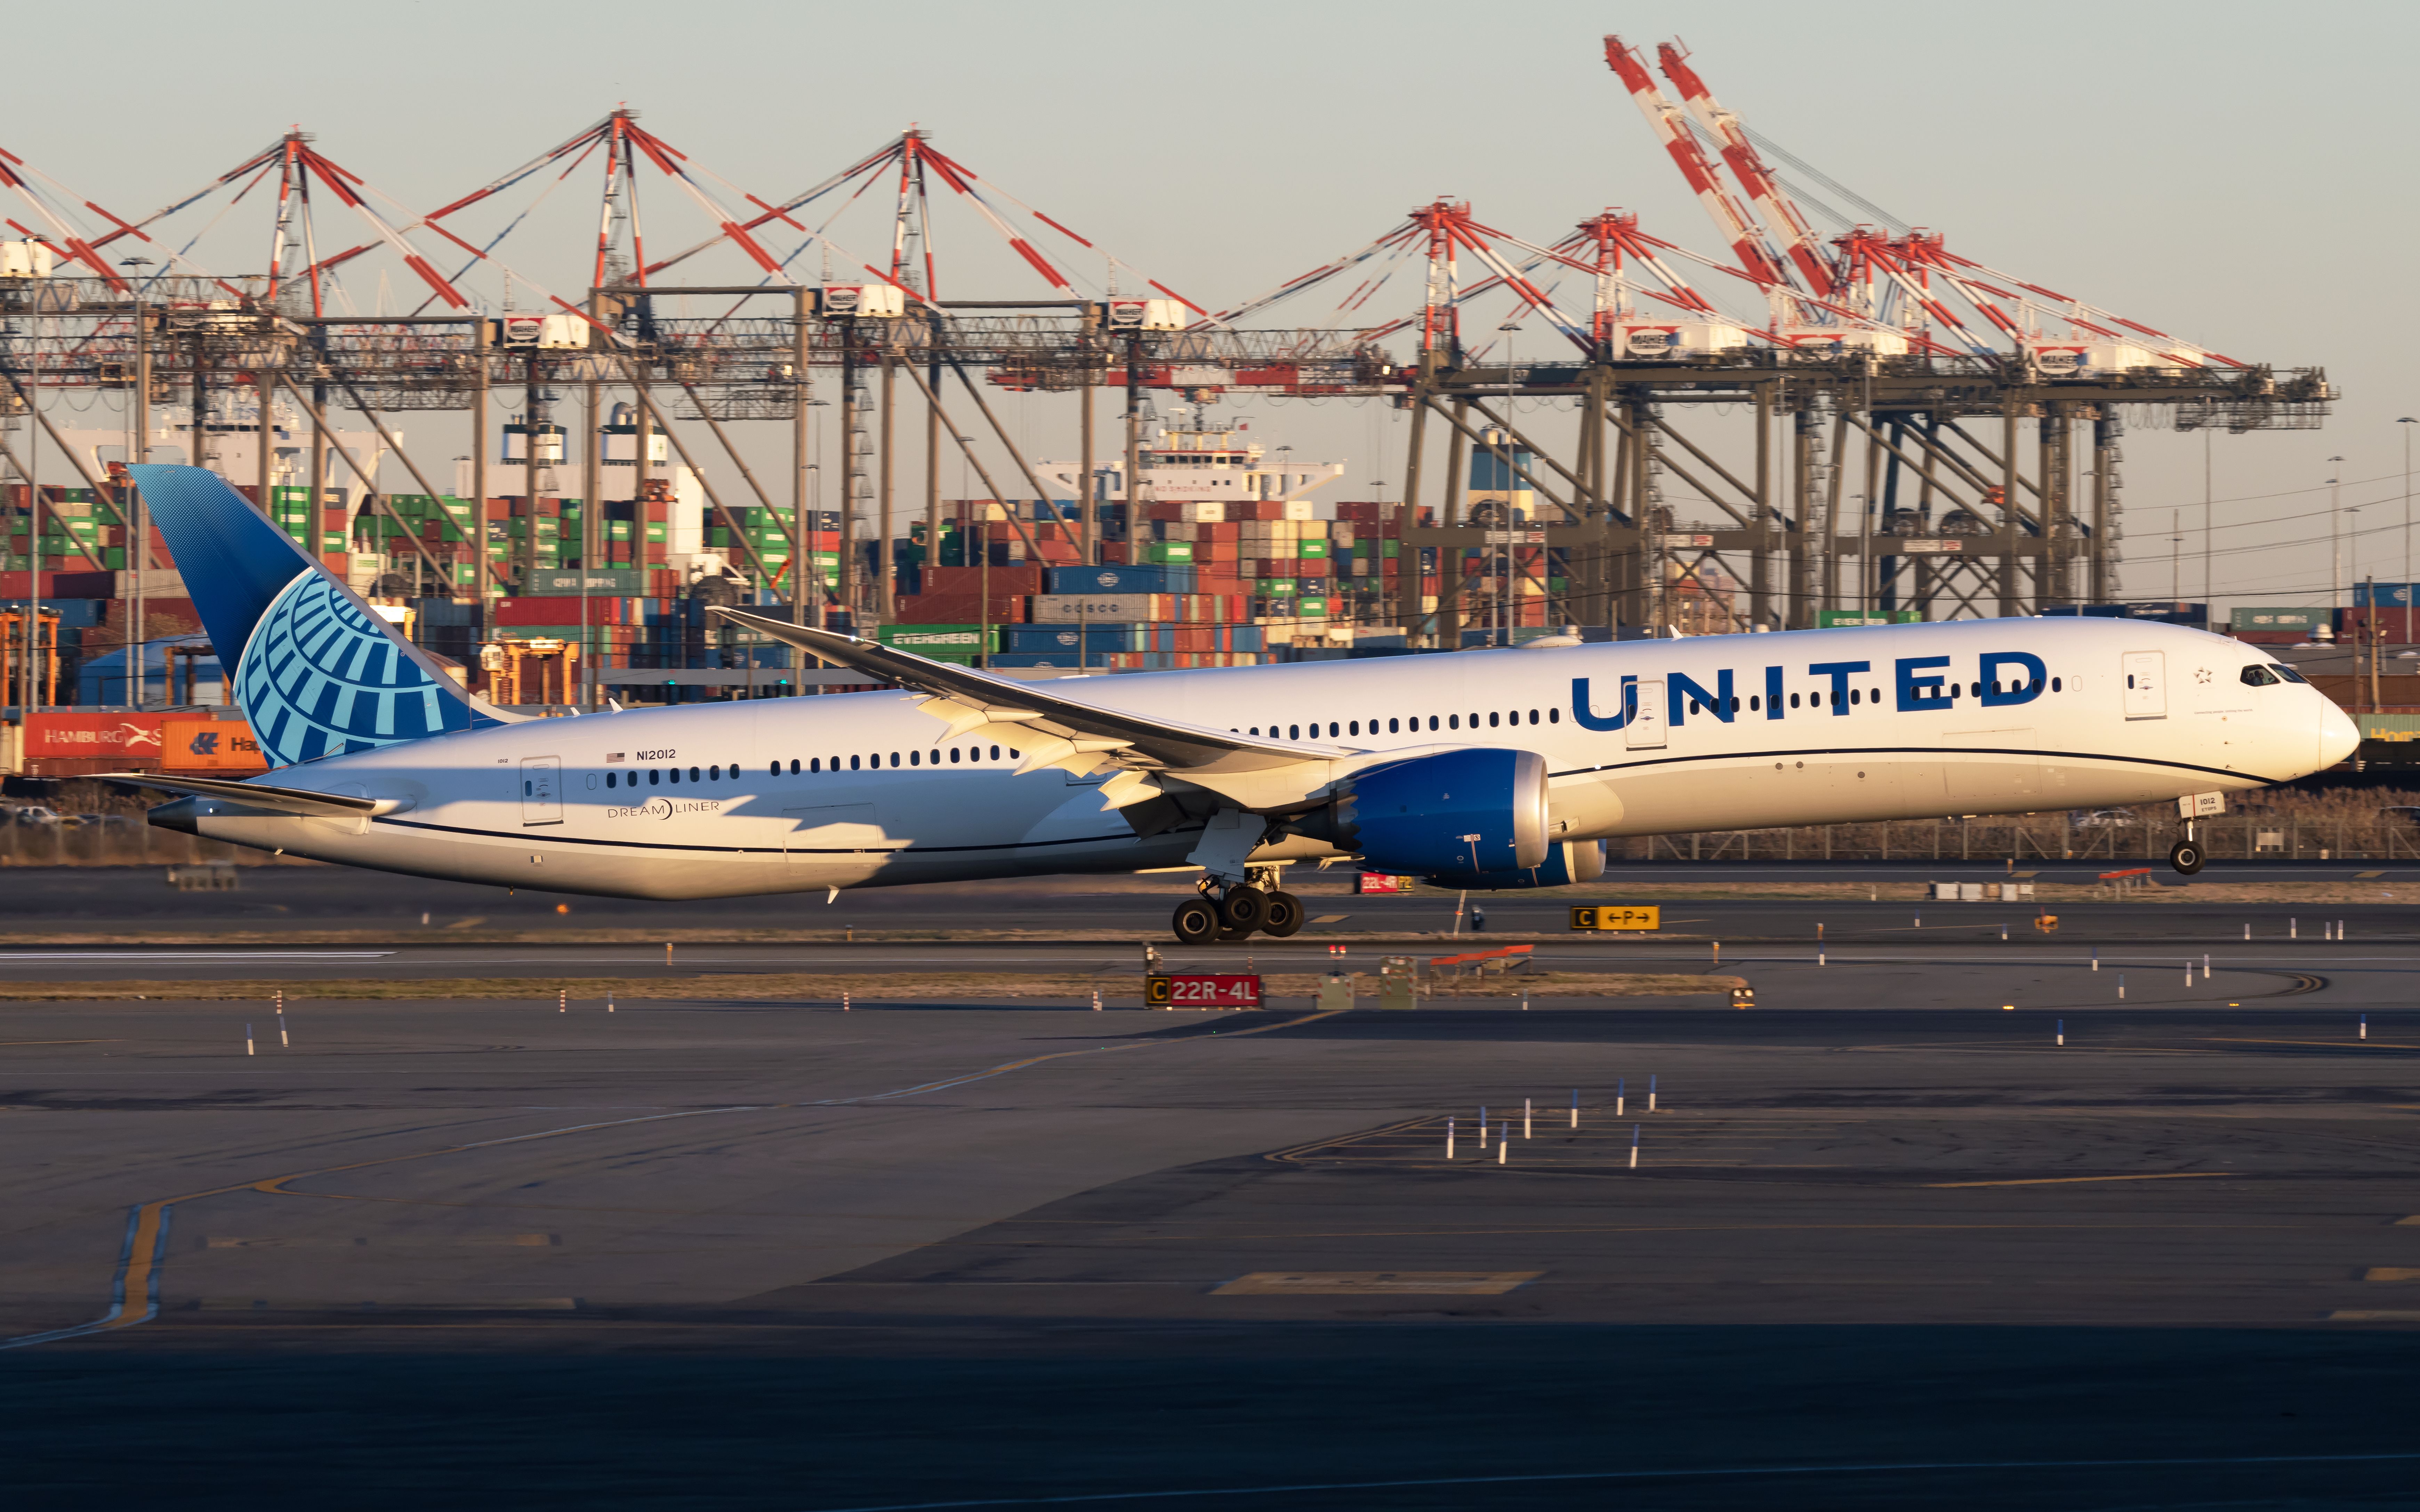 A United airlines boeing 787-10 taking off from Newark Liberty International Airport.